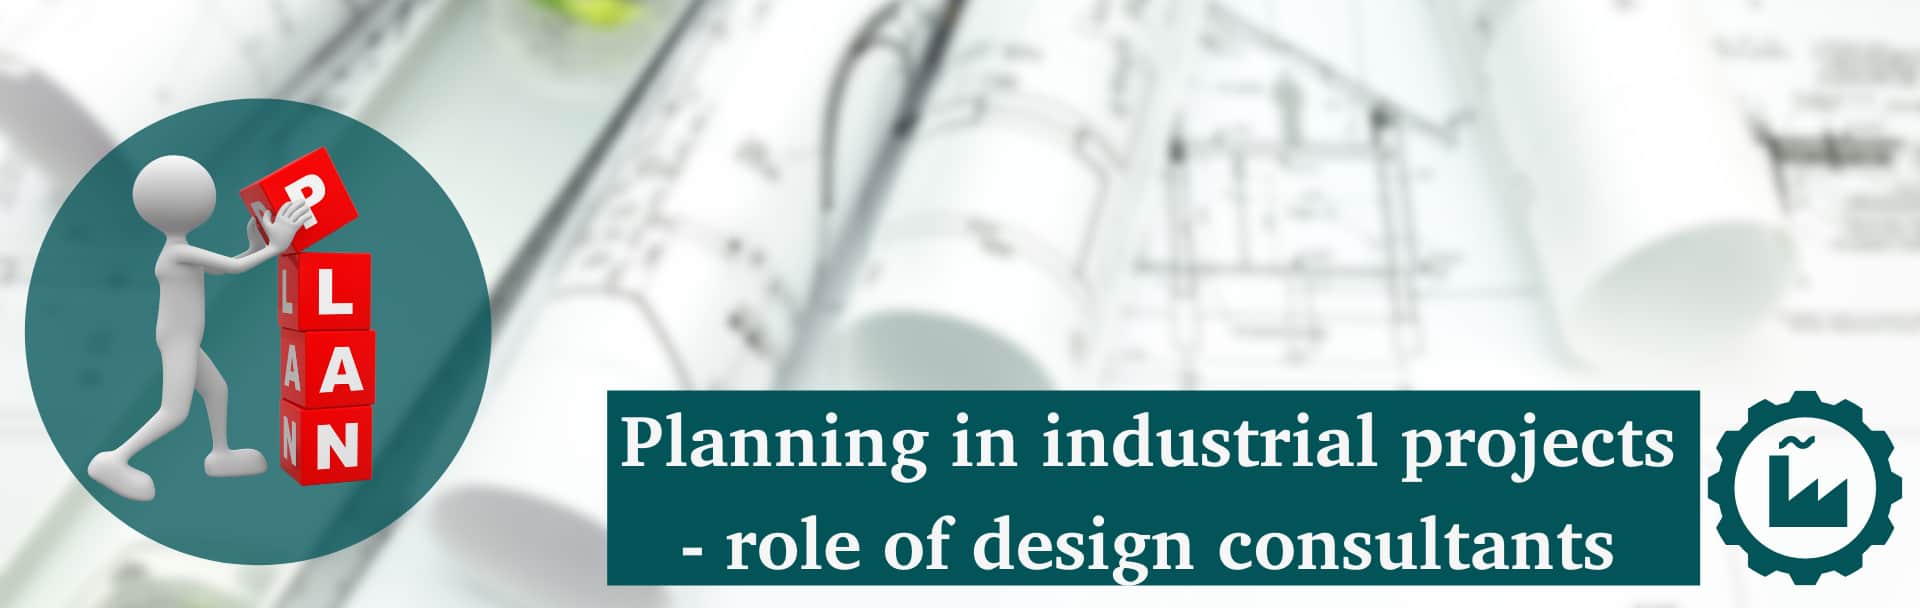 Design consultants for industrial projects